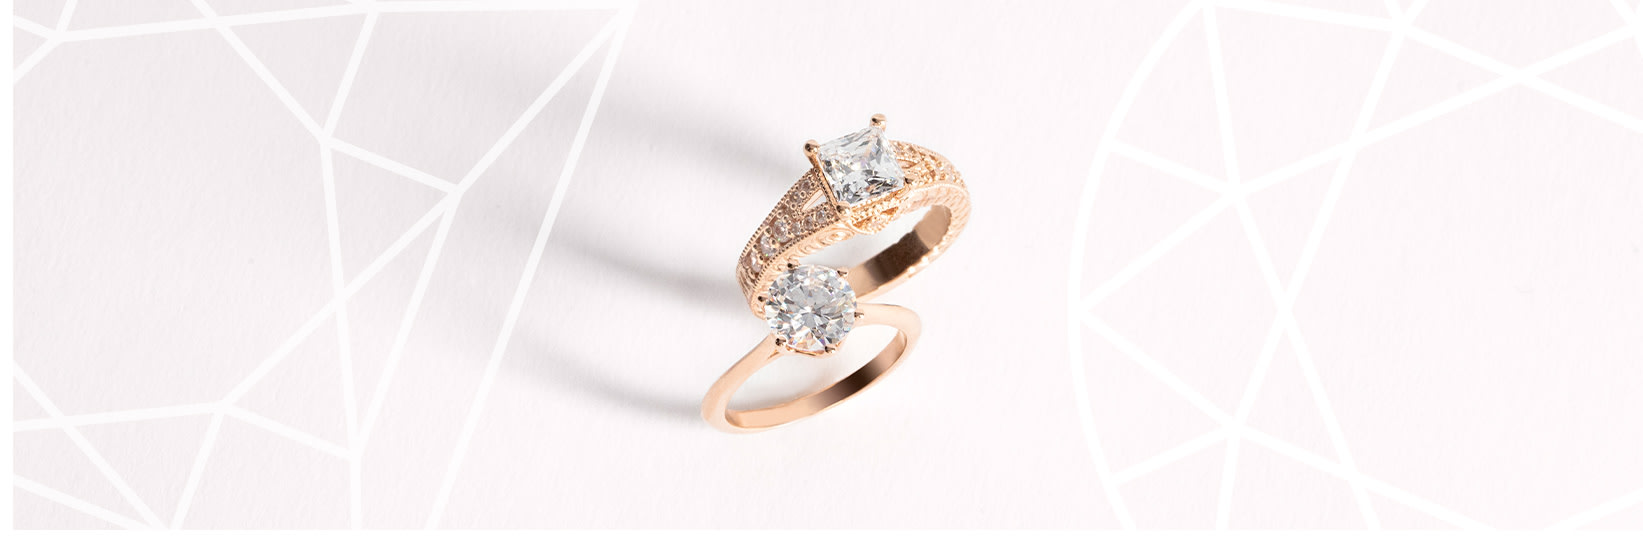 A princess cut engagement ring and a round cut engagement ring side-by-side